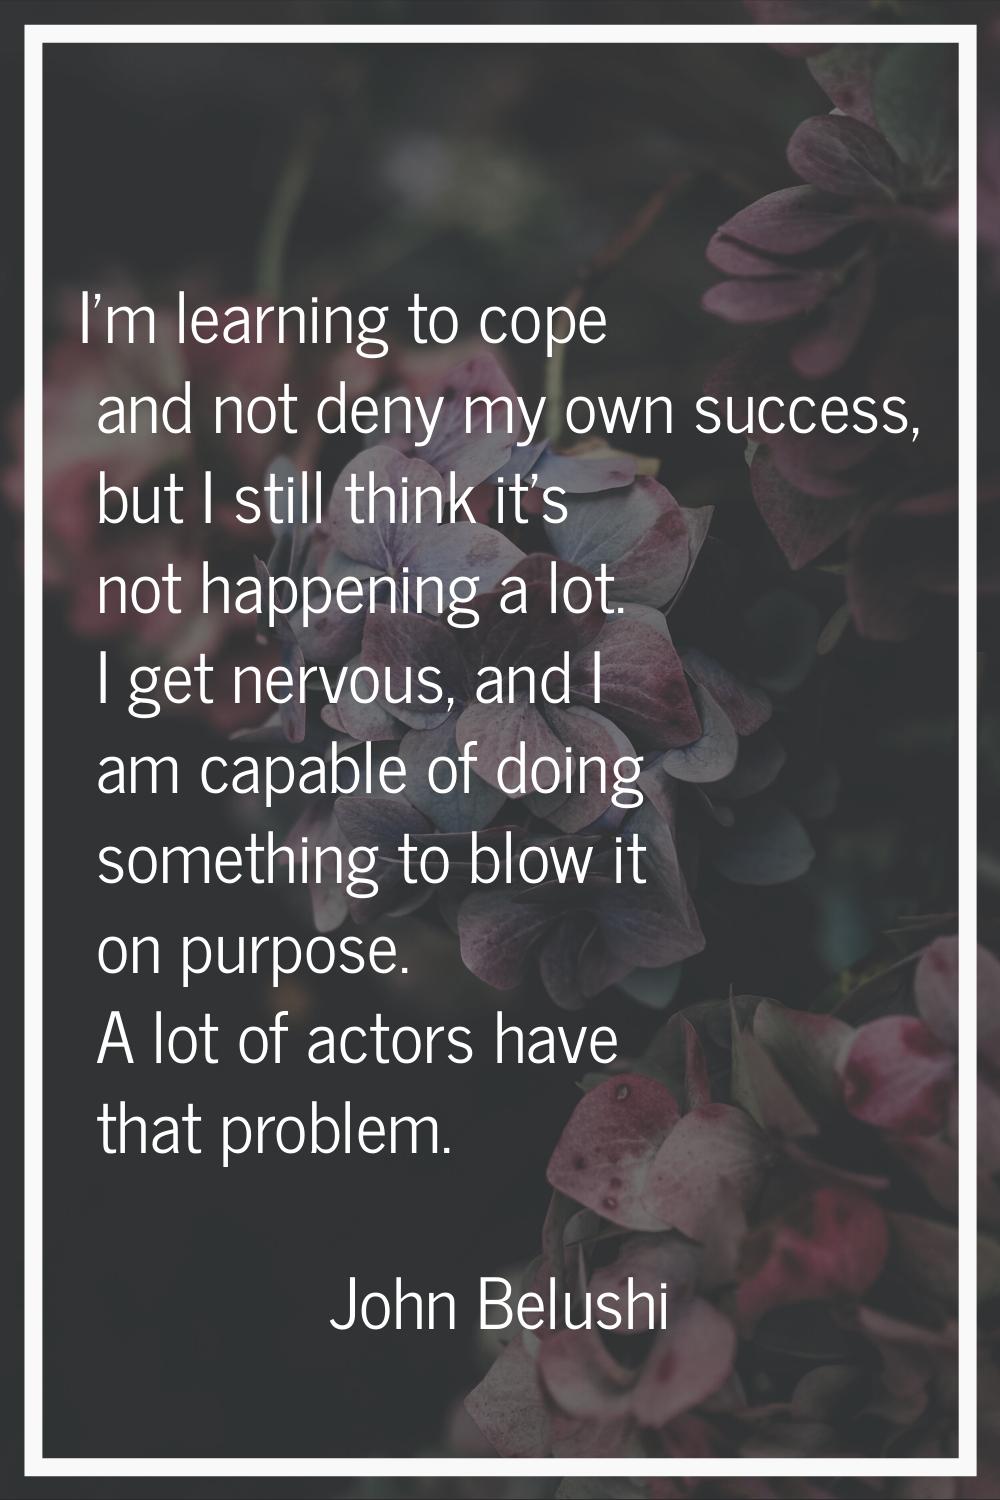 I'm learning to cope and not deny my own success, but I still think it's not happening a lot. I get